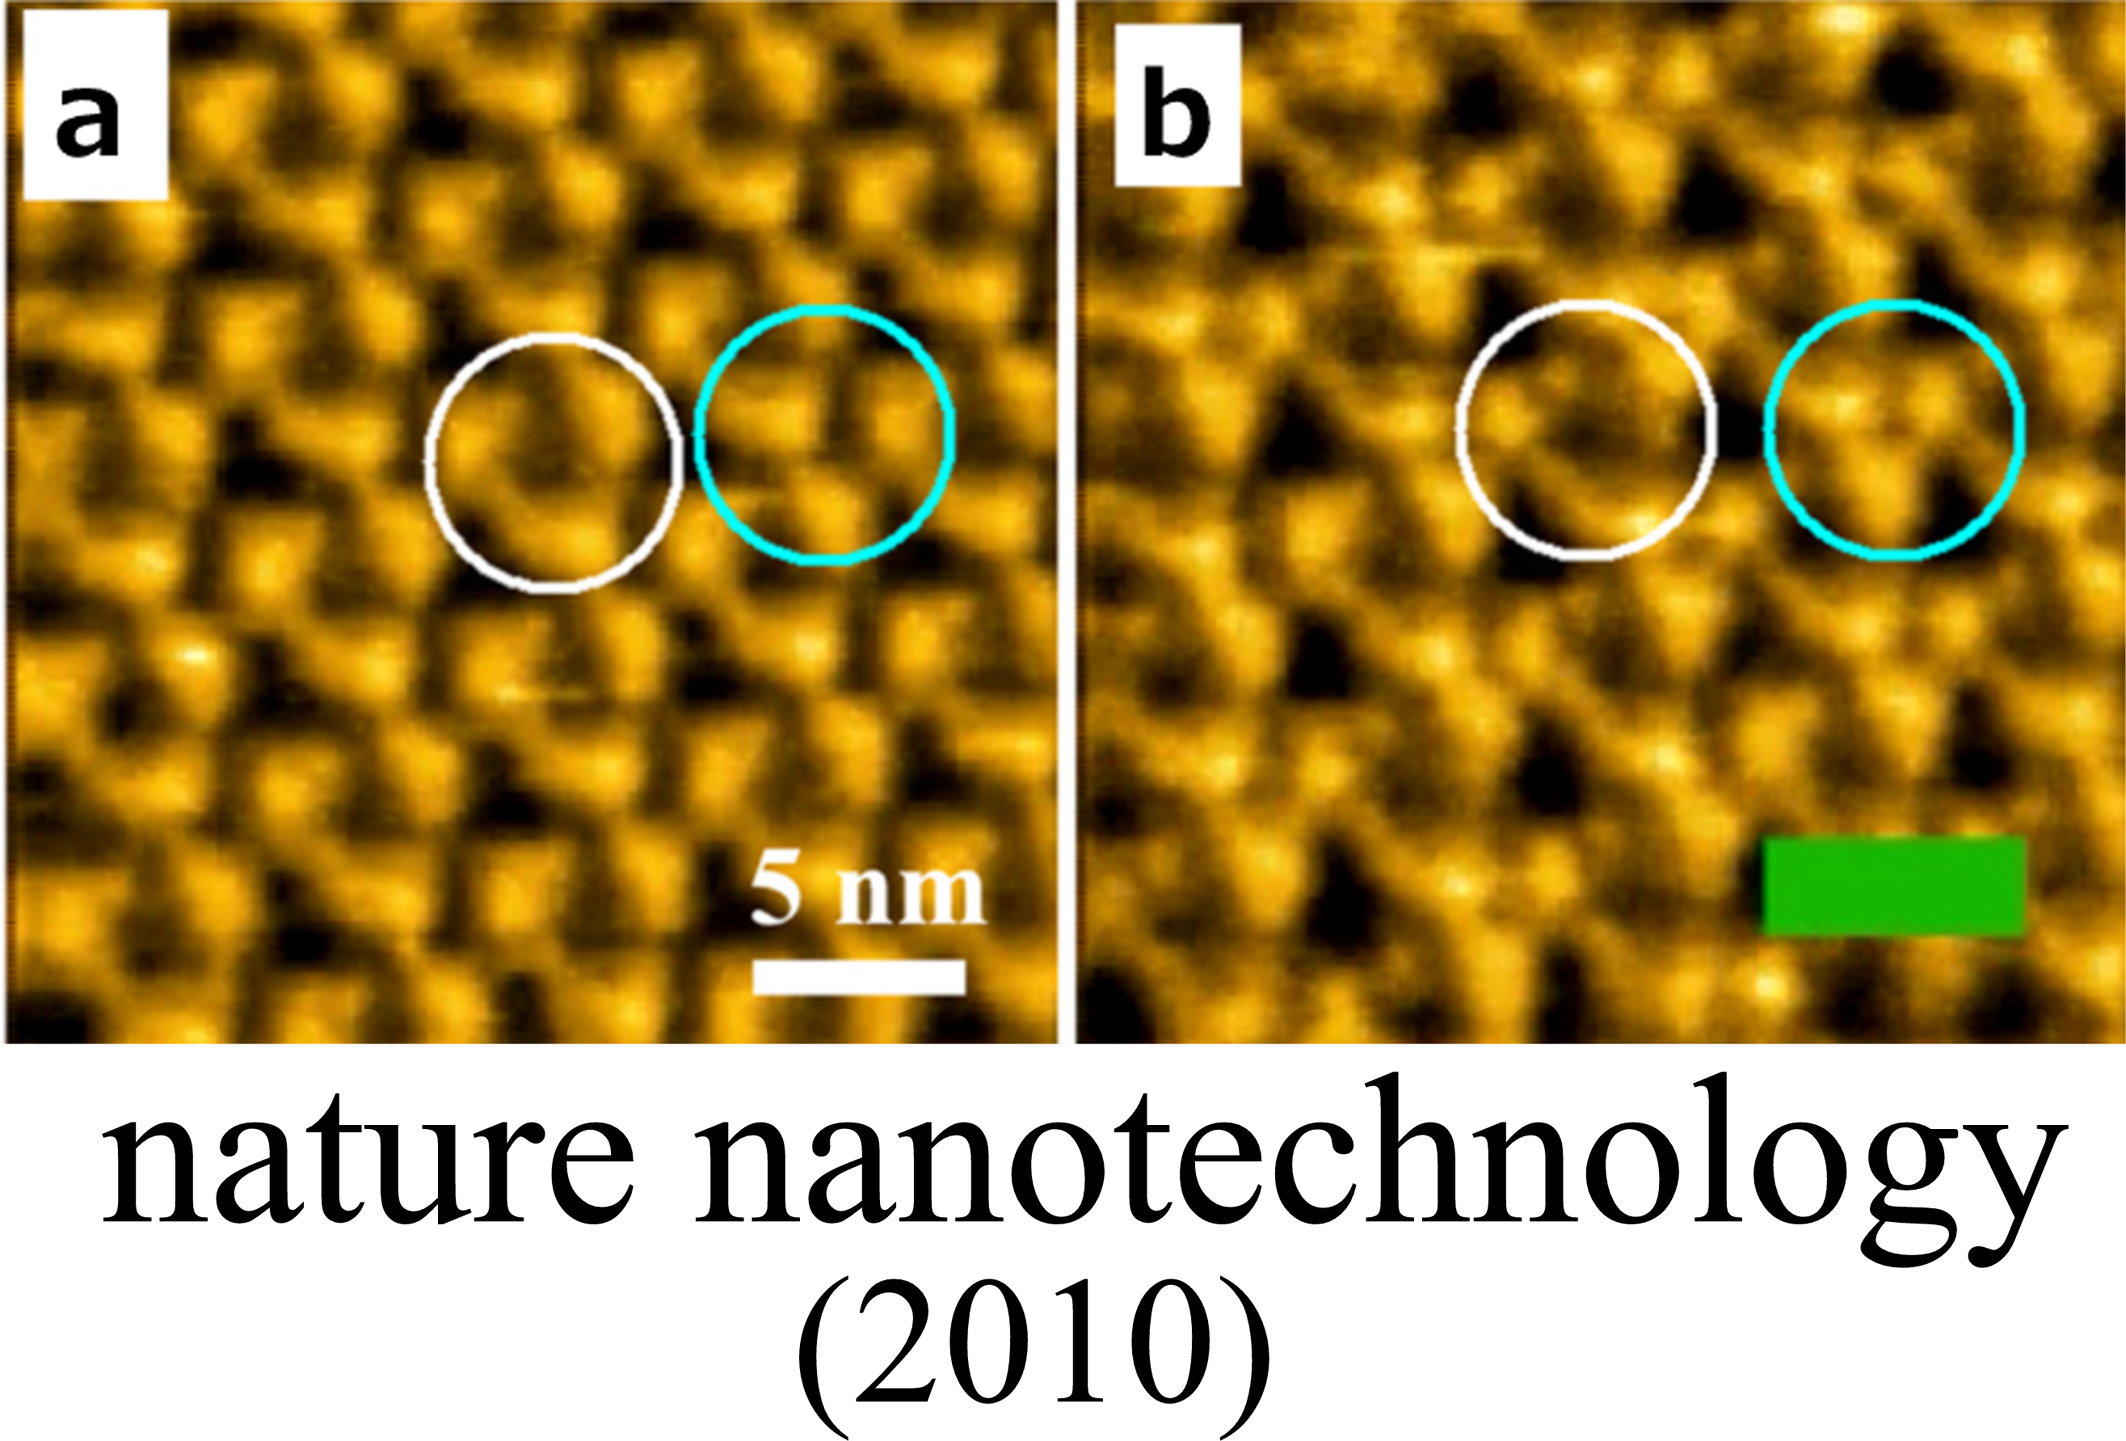 Development and Biological Application of High-speed Atomic Force Microscopy